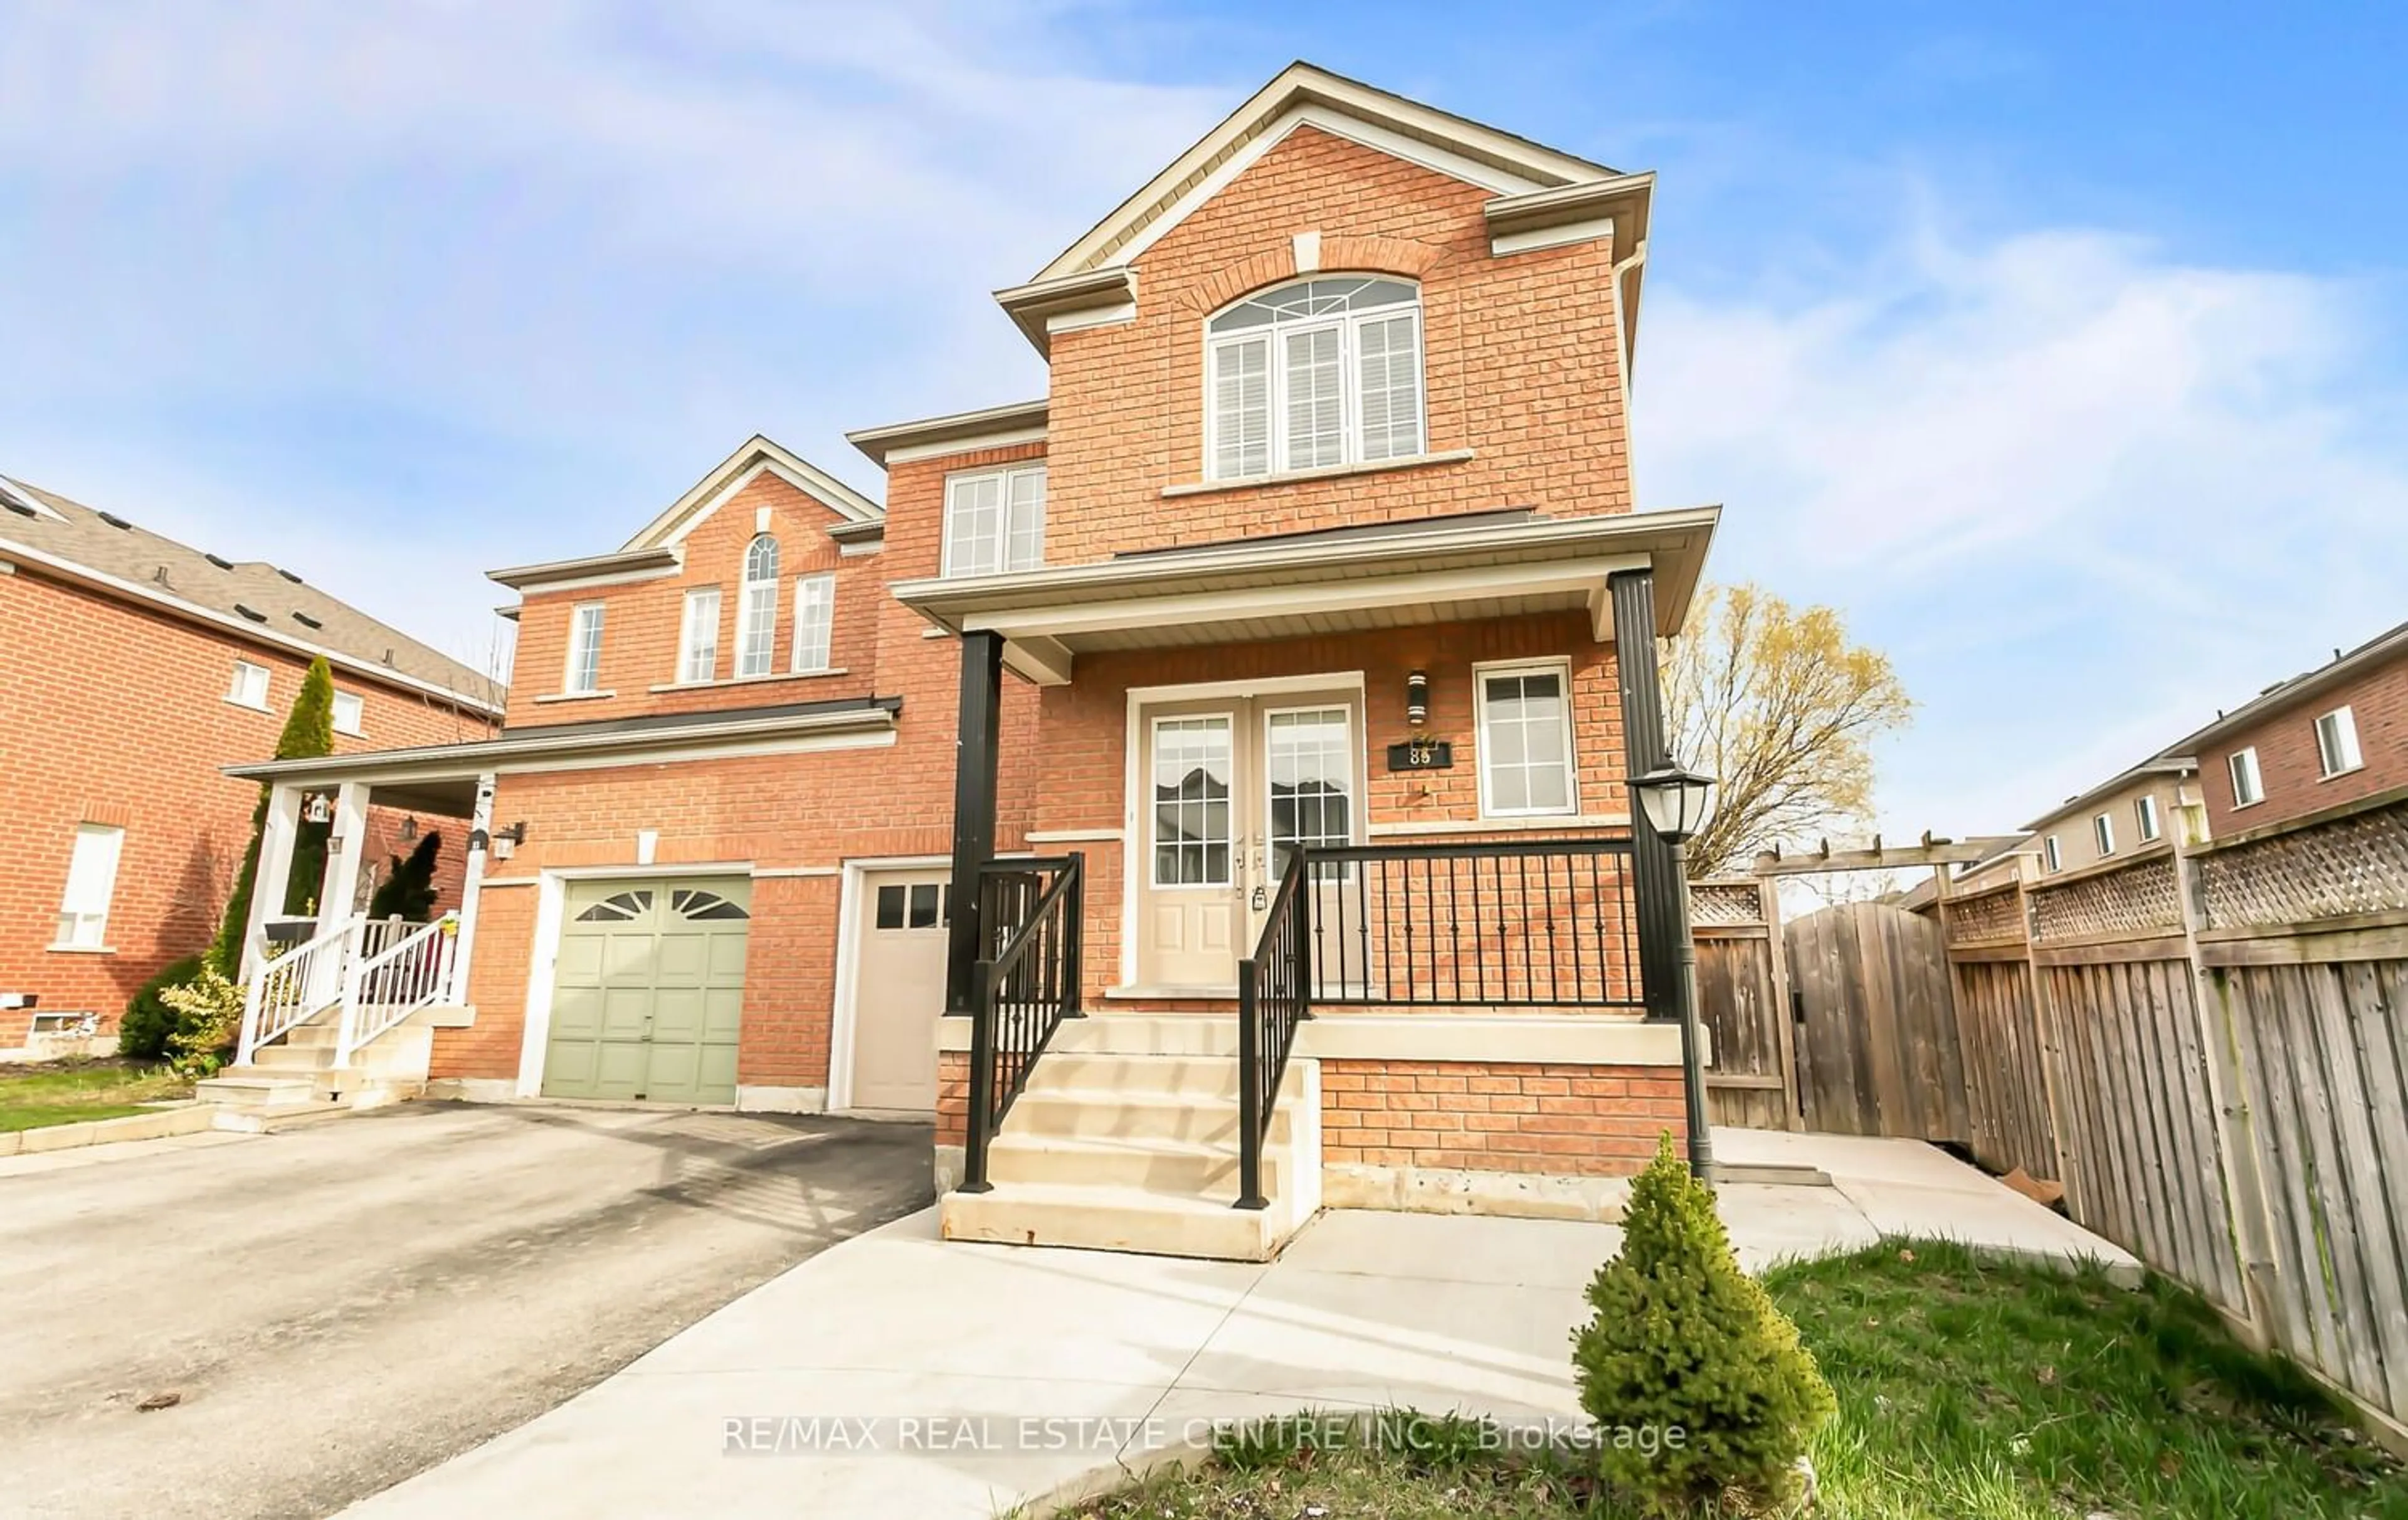 Home with brick exterior material for 85 Viceroy Cres, Brampton Ontario L7A 1V4